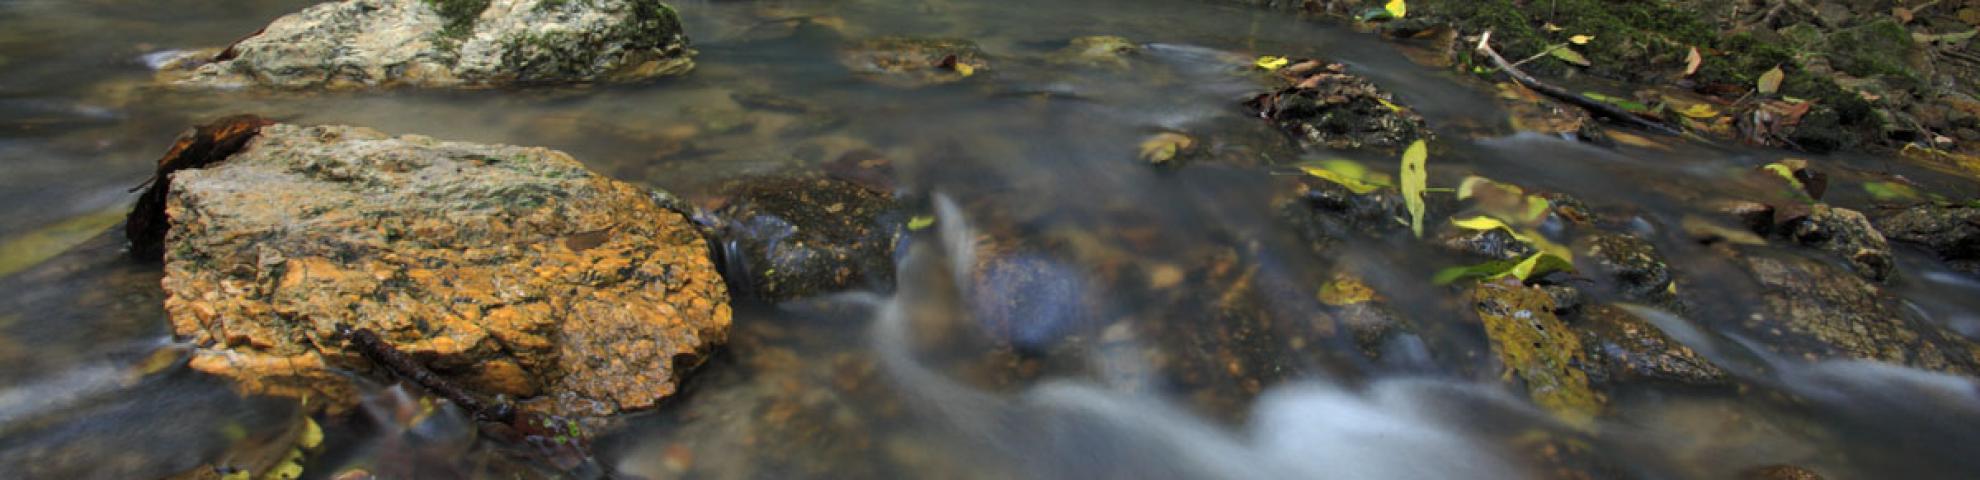 rocks and water in forest